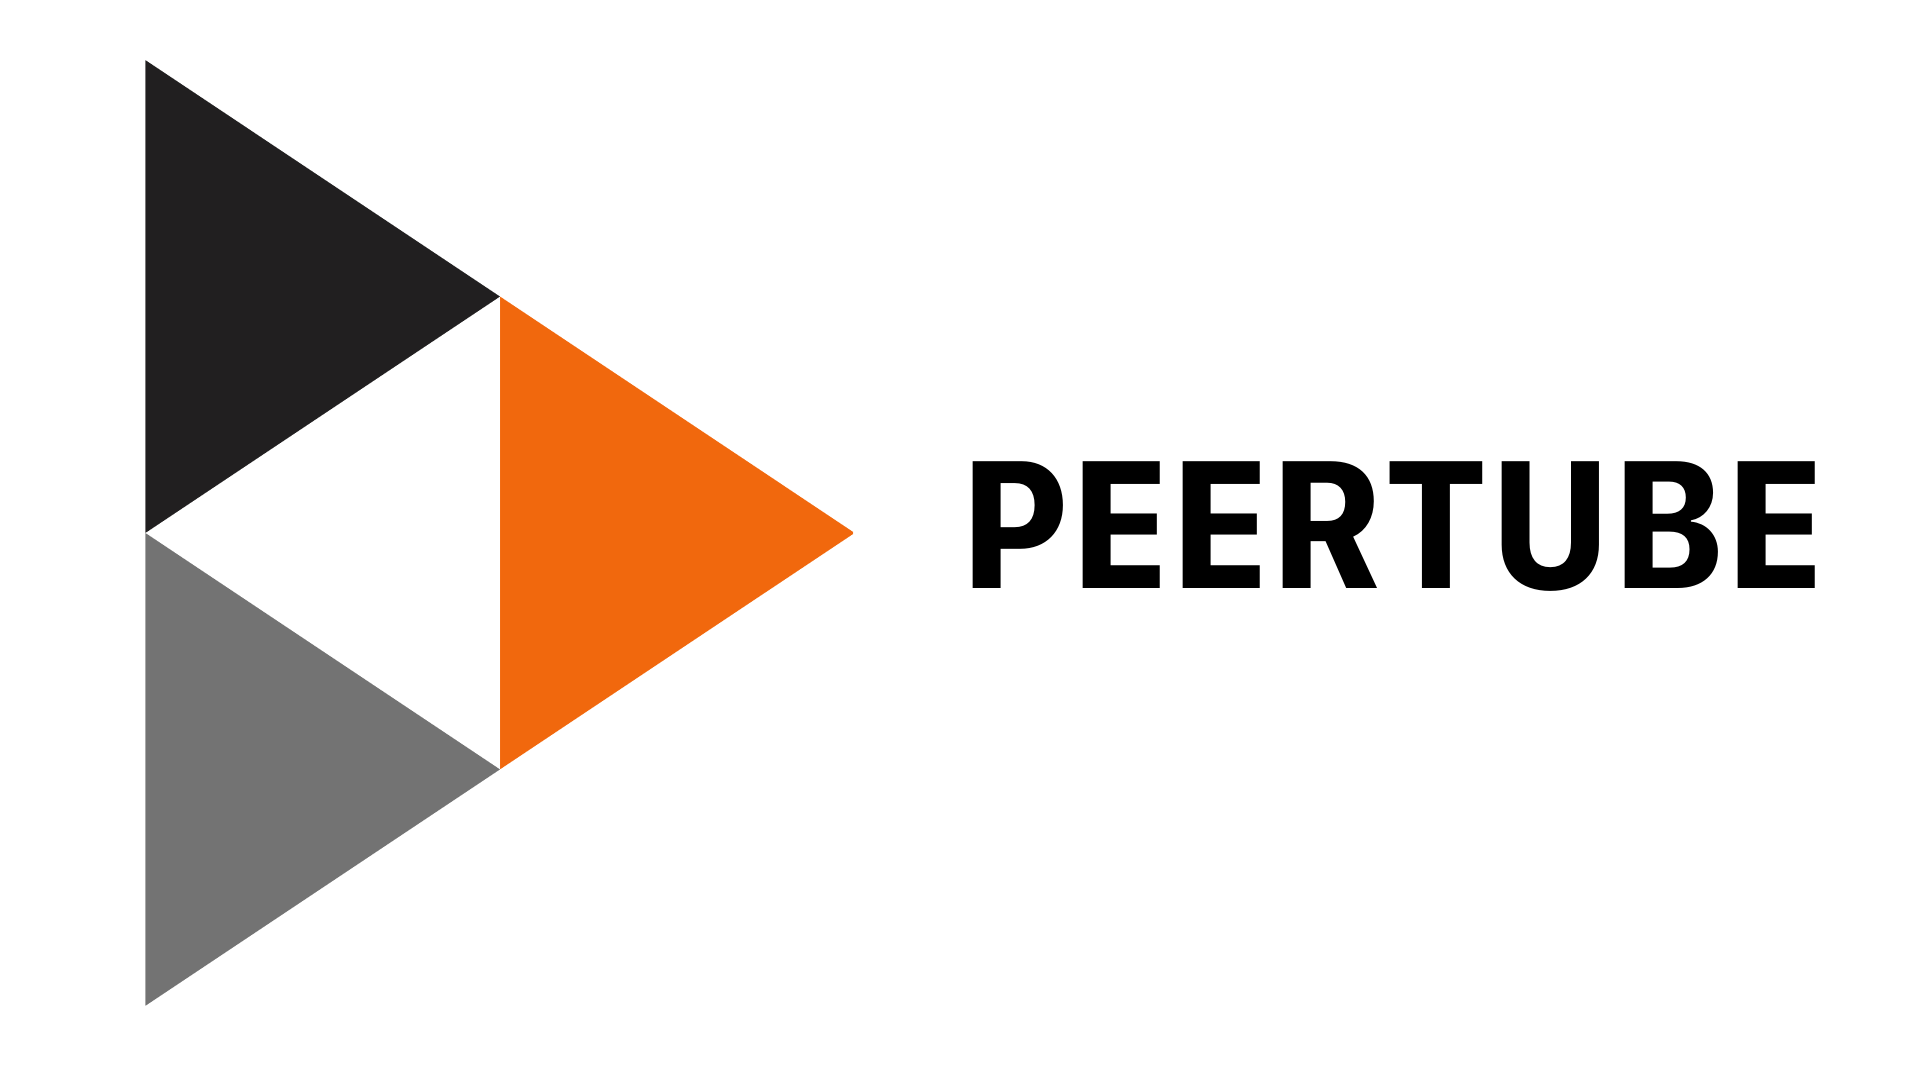 This month I donated to Peertube, a Free, open-source, federated and P2P alternative to YouTube.